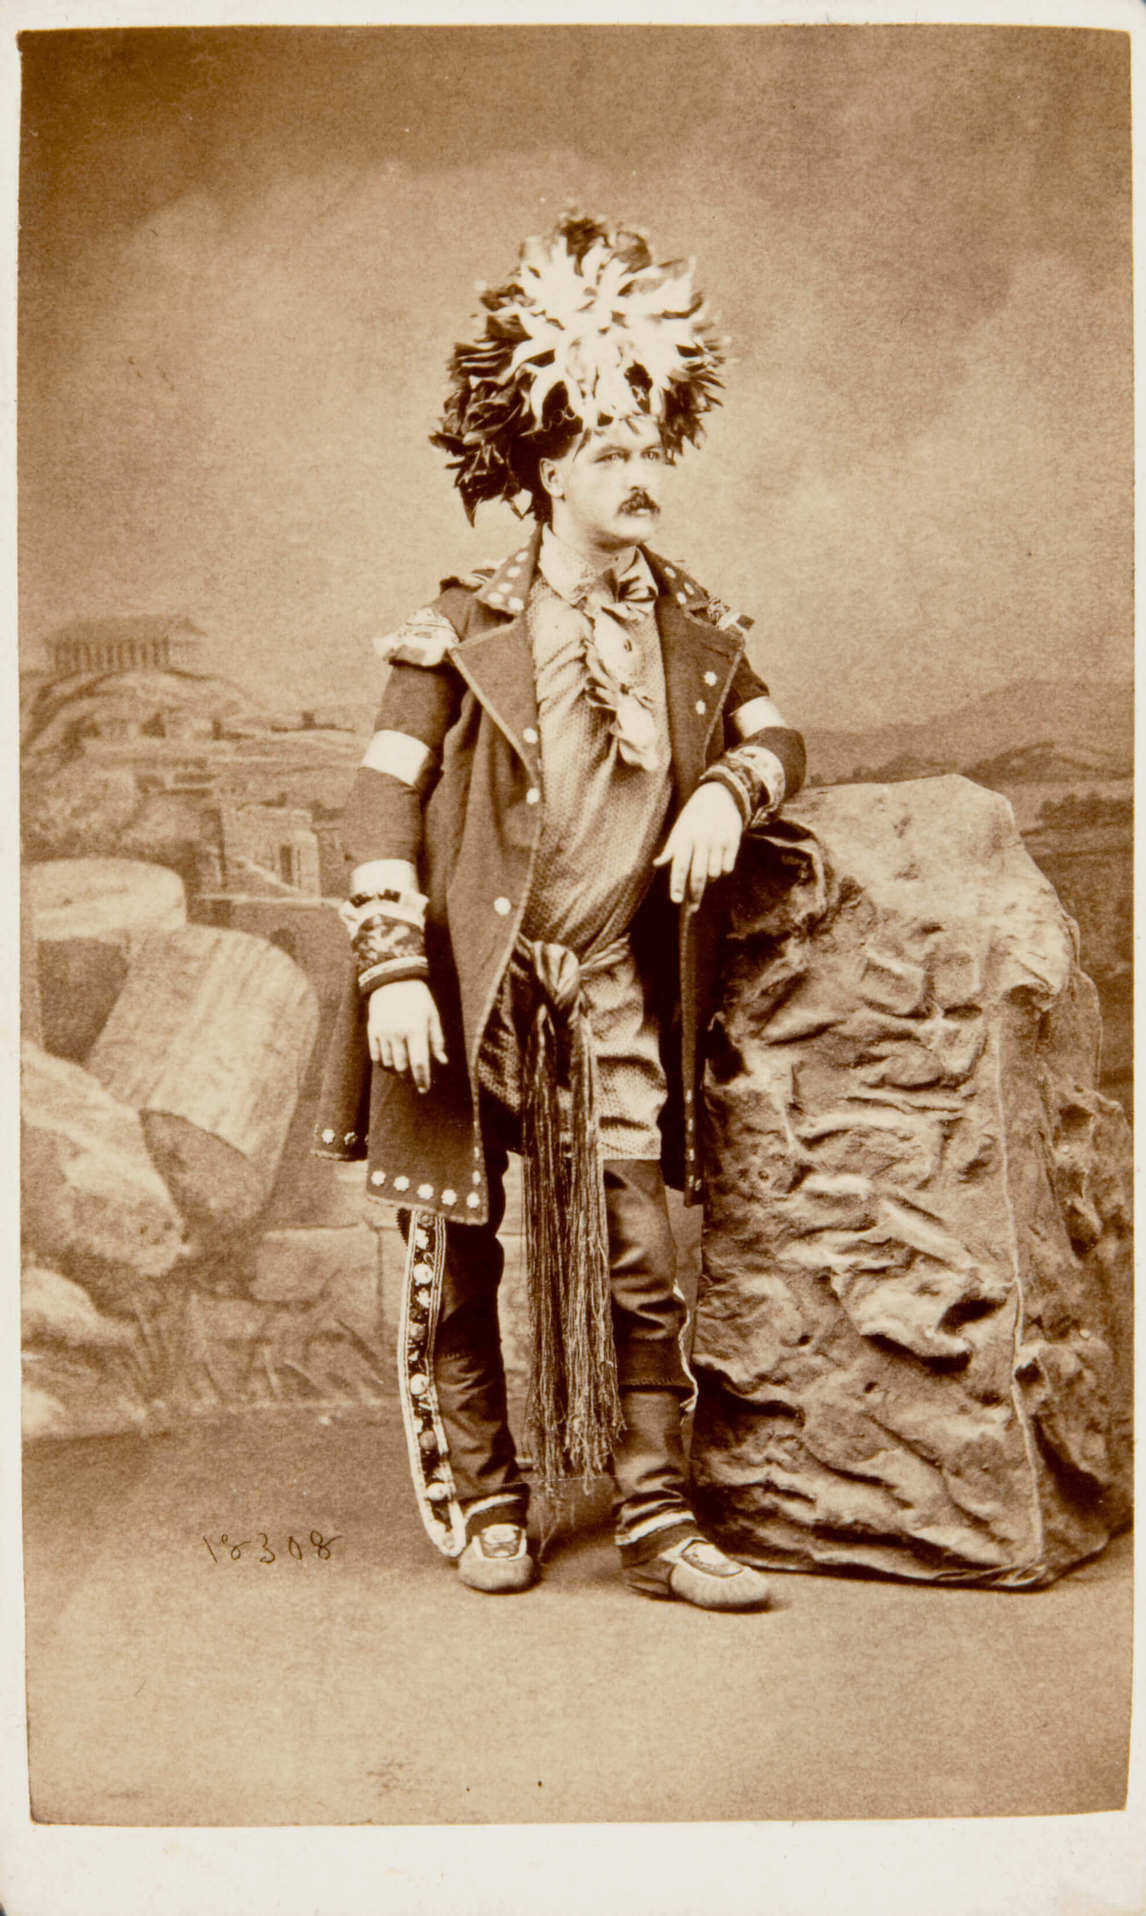 Art Canada Institute, Zacharie Vincent, The journalist and historian André-Napoléon Montpetit, dressed as Honorary Huron Chief, 1878